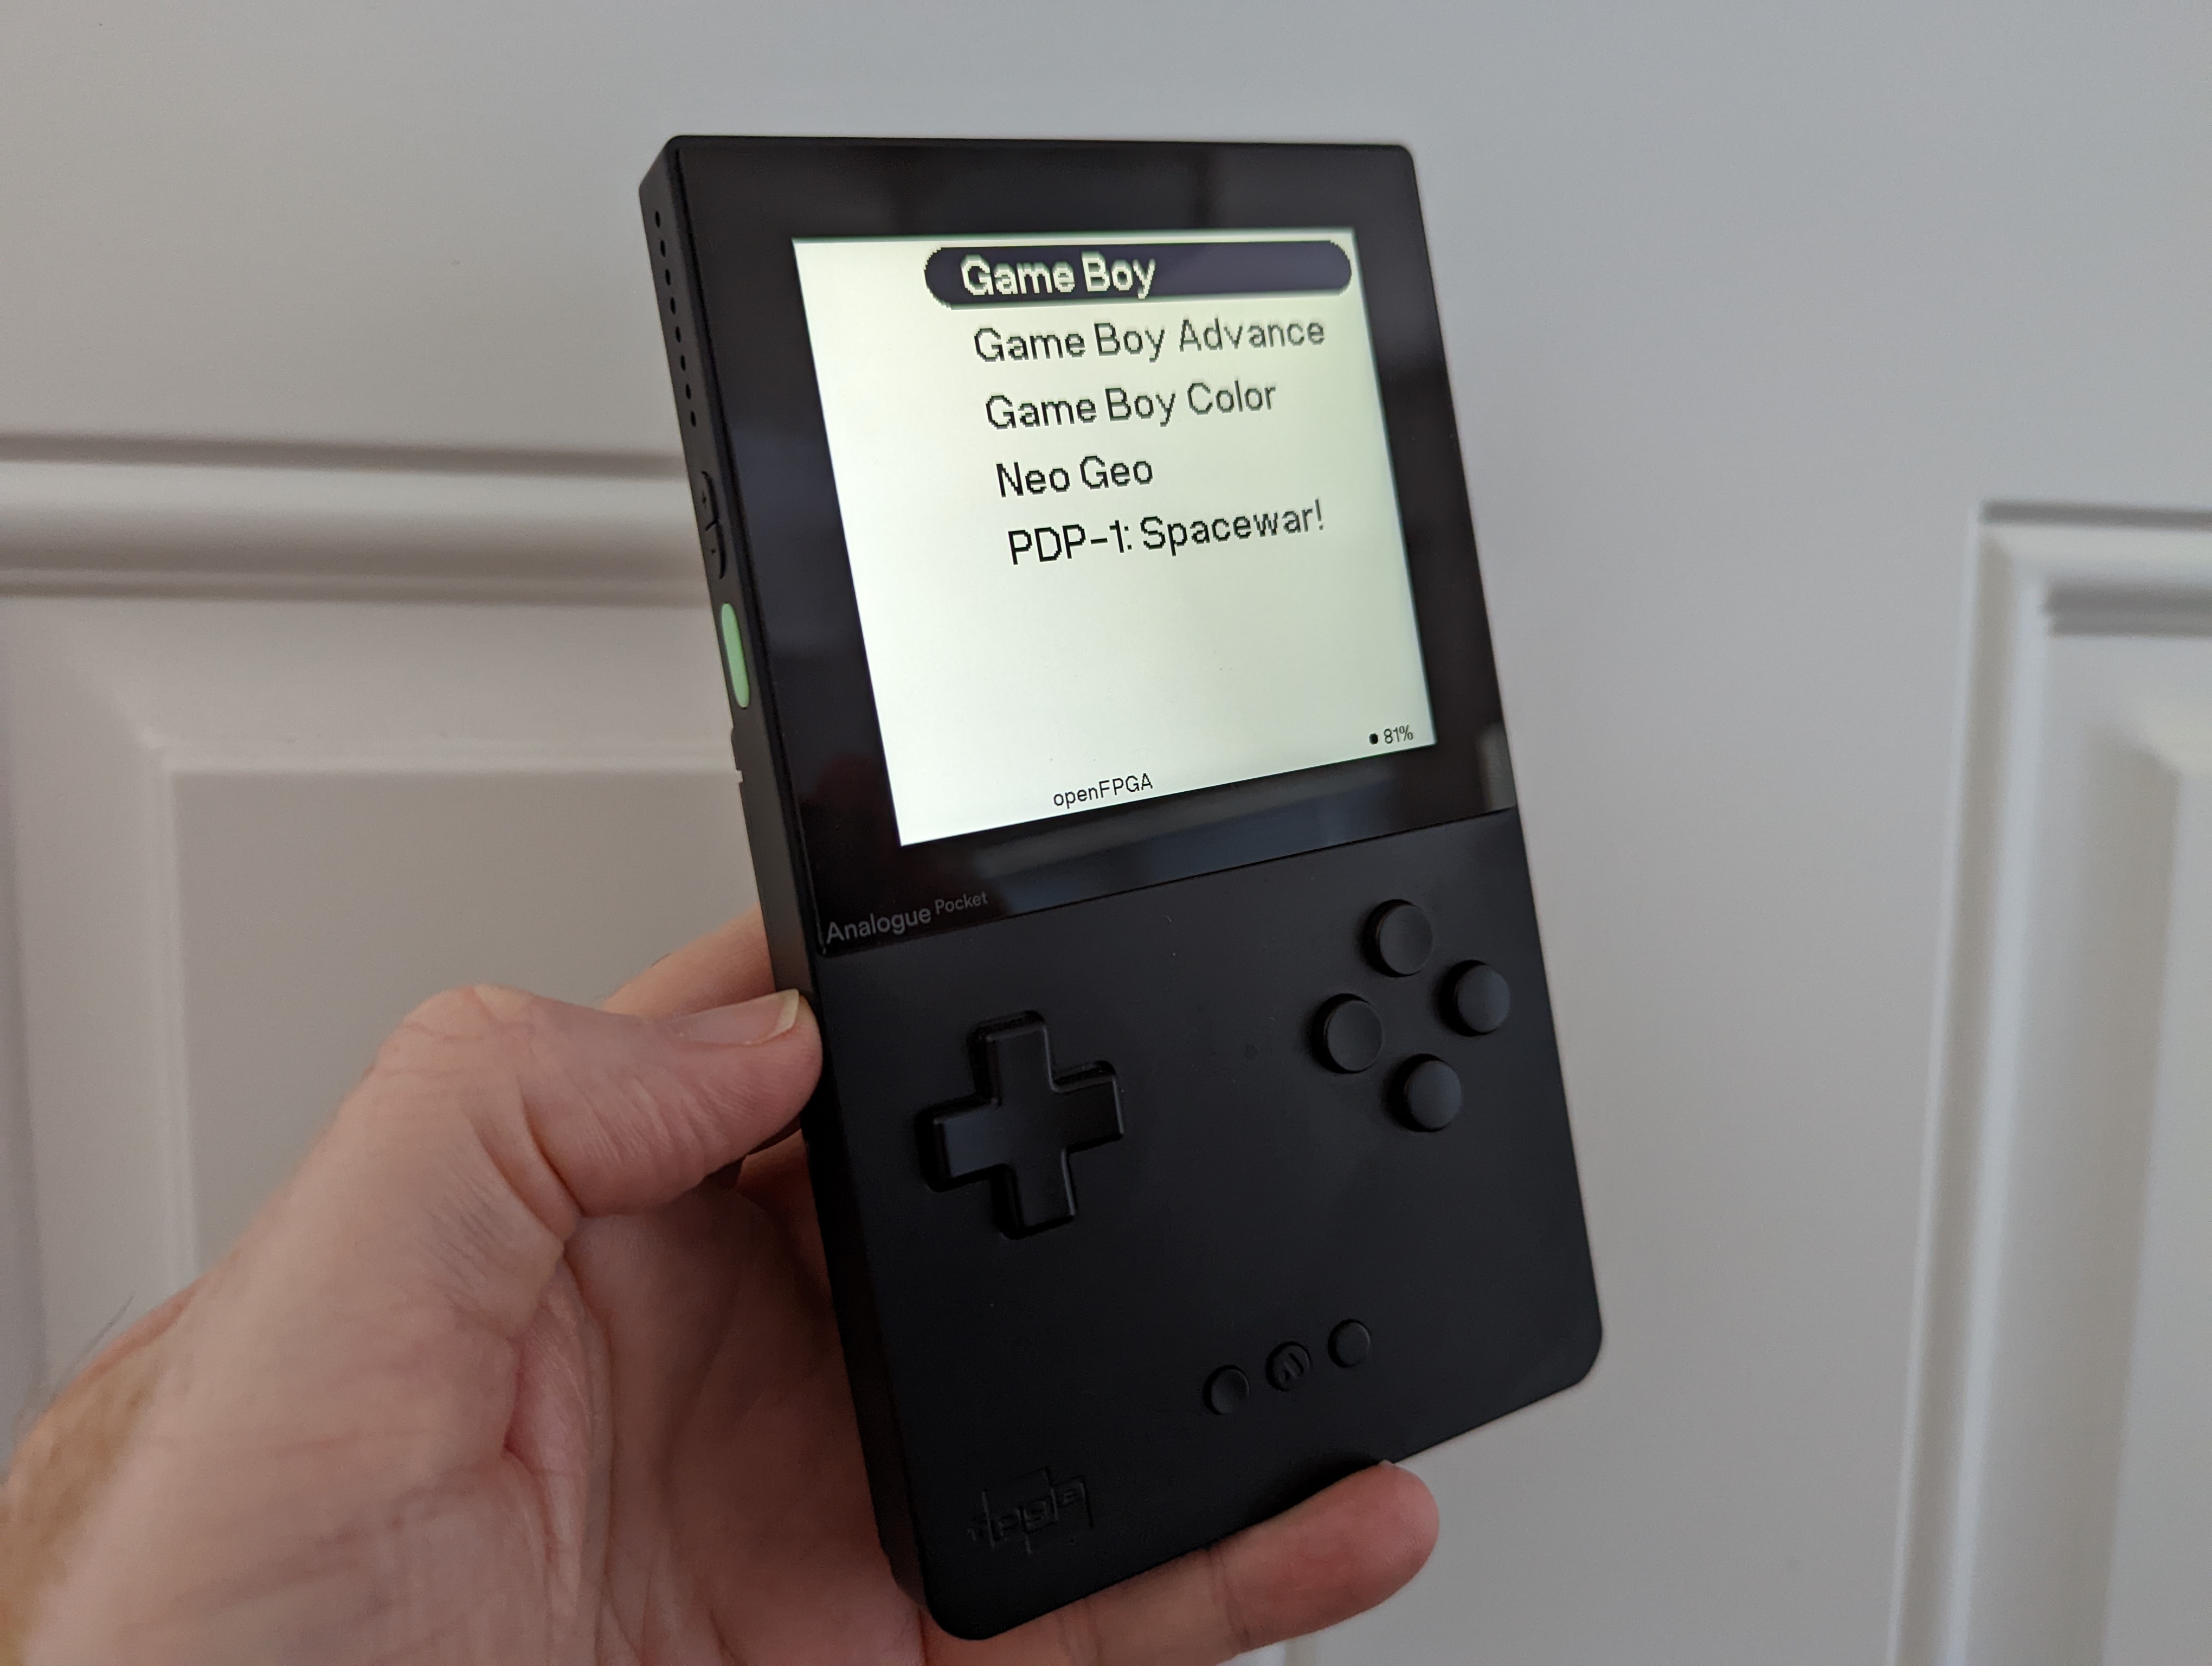 The Analogue Pocket might be the perfect portable video game system